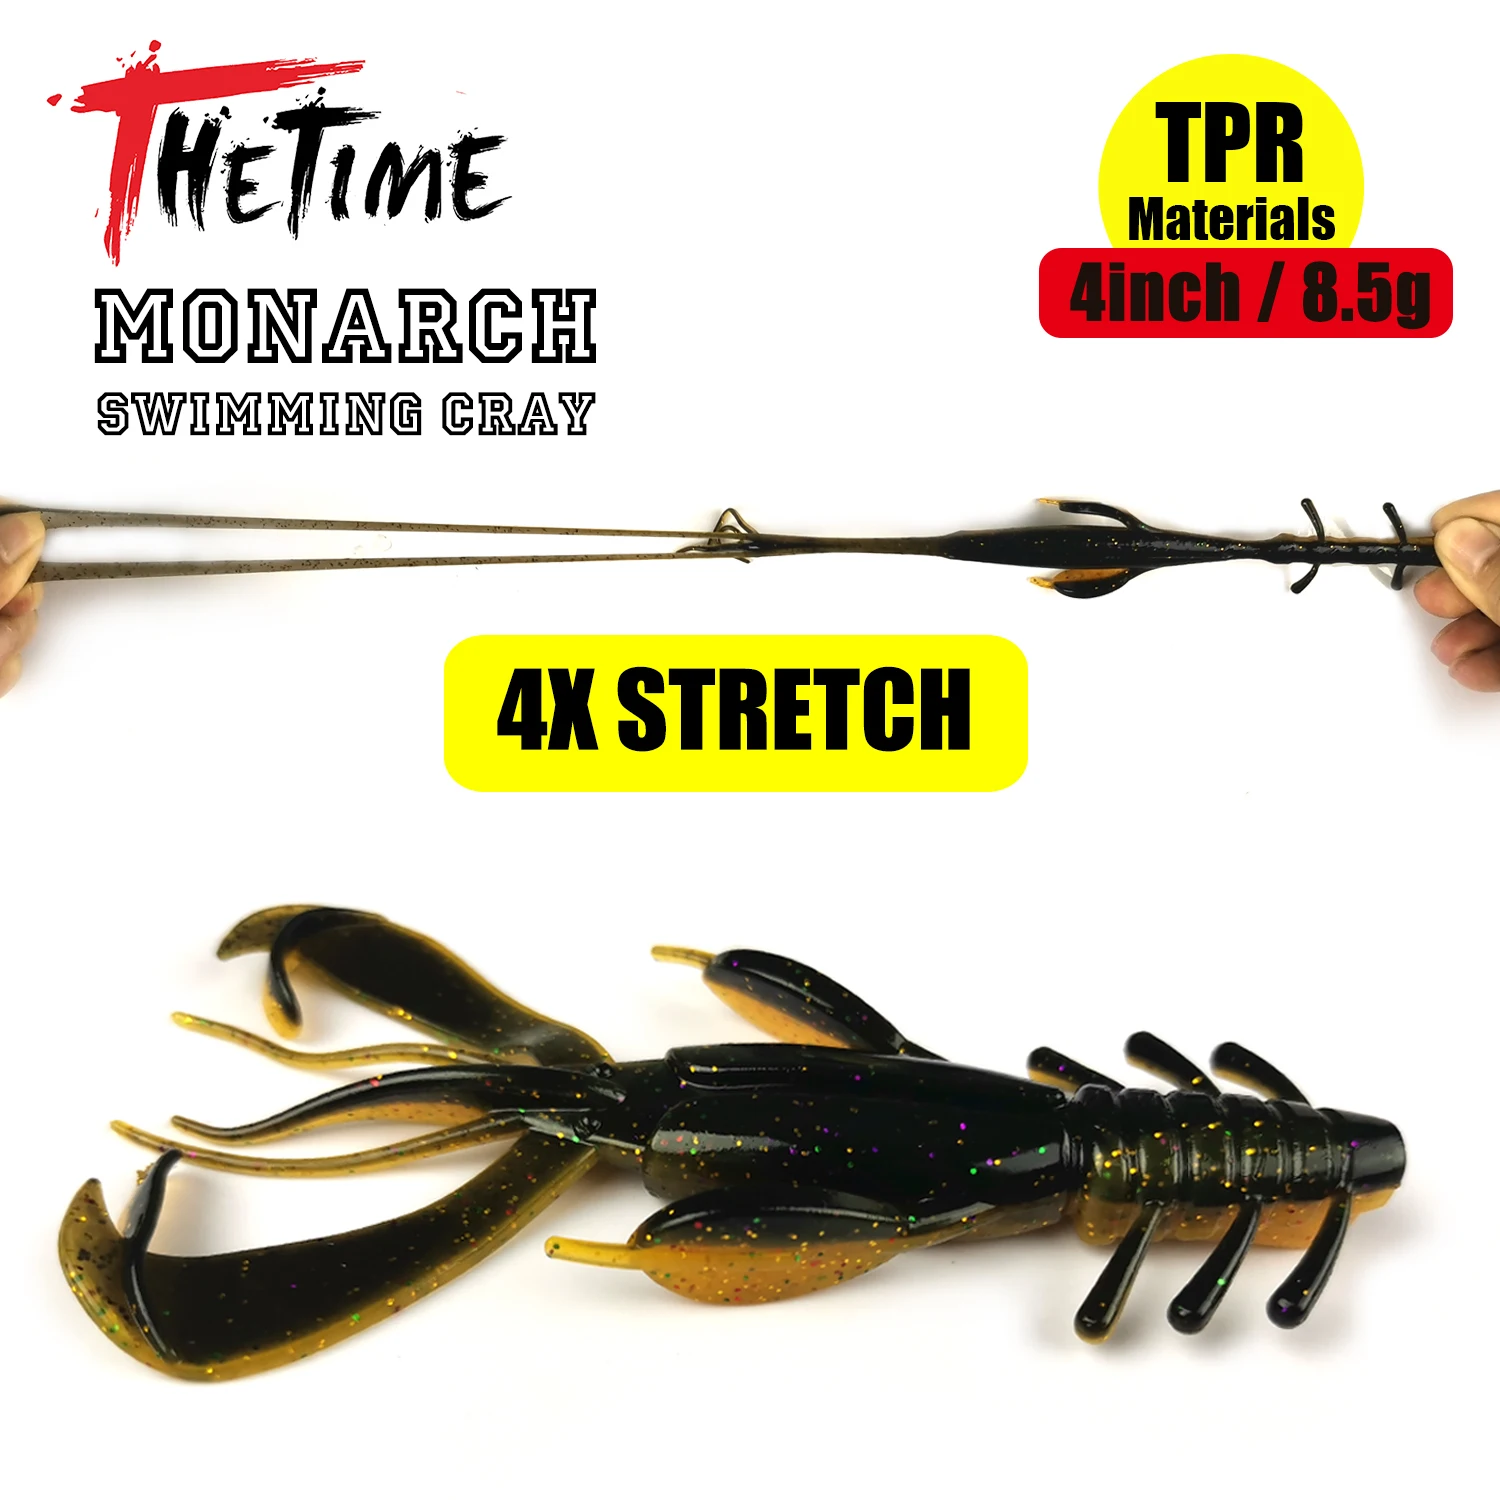 2021 New THETIME Monarch Cray Crazy Flapper Soft Swim Crayfish Silicone  Texas NED Rig Shrimp Bait For Bass Fishing Tackle